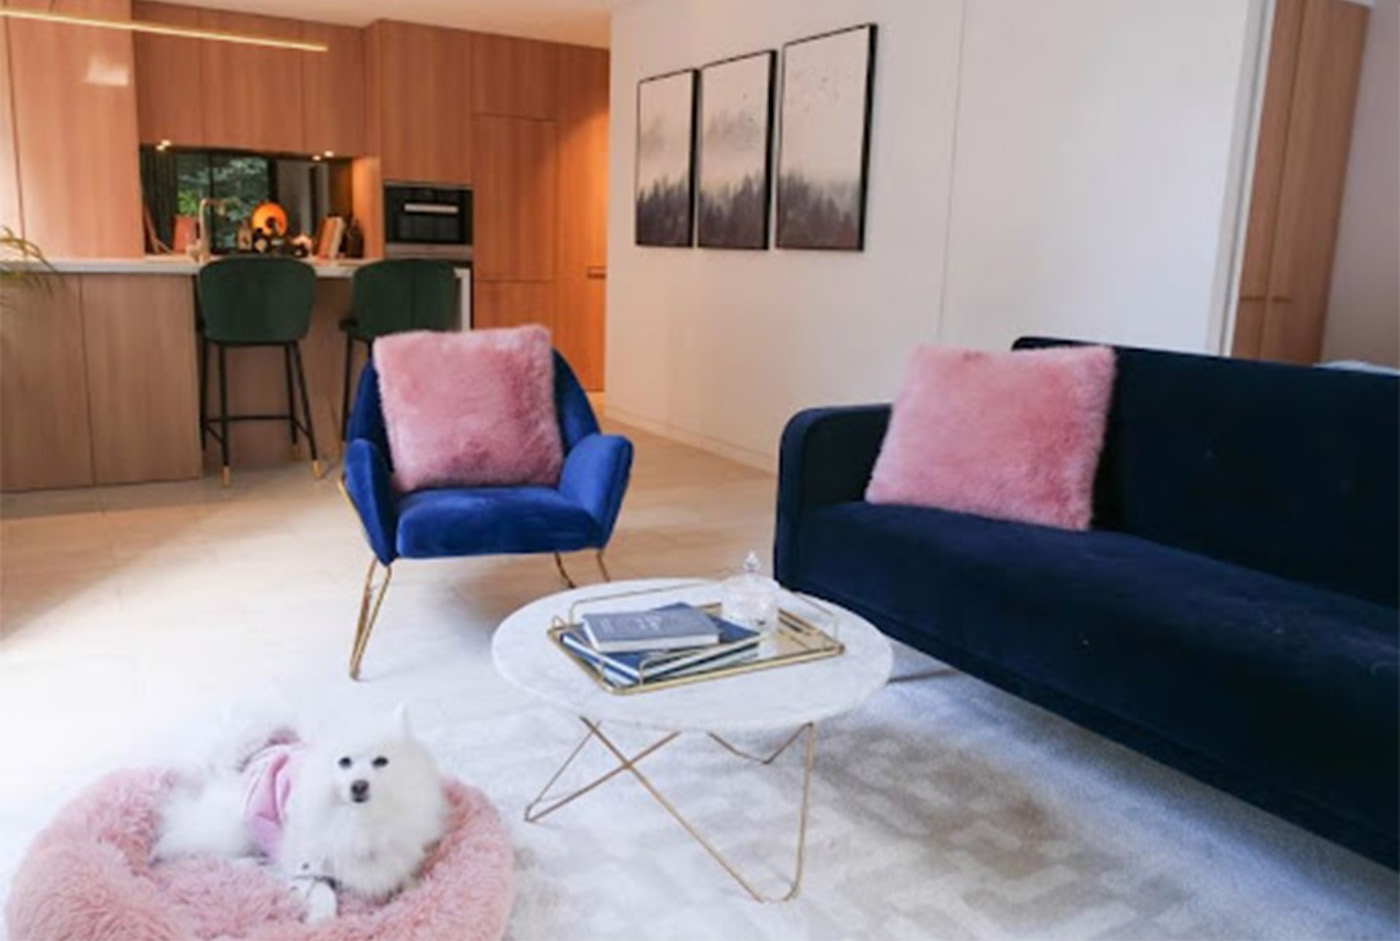 Modern livingroom with kitchen in background. Couch and small chair are both velvet and royal blue with pink fluffy pillows. A small white fluffy dog sits in the bottom left corner.  